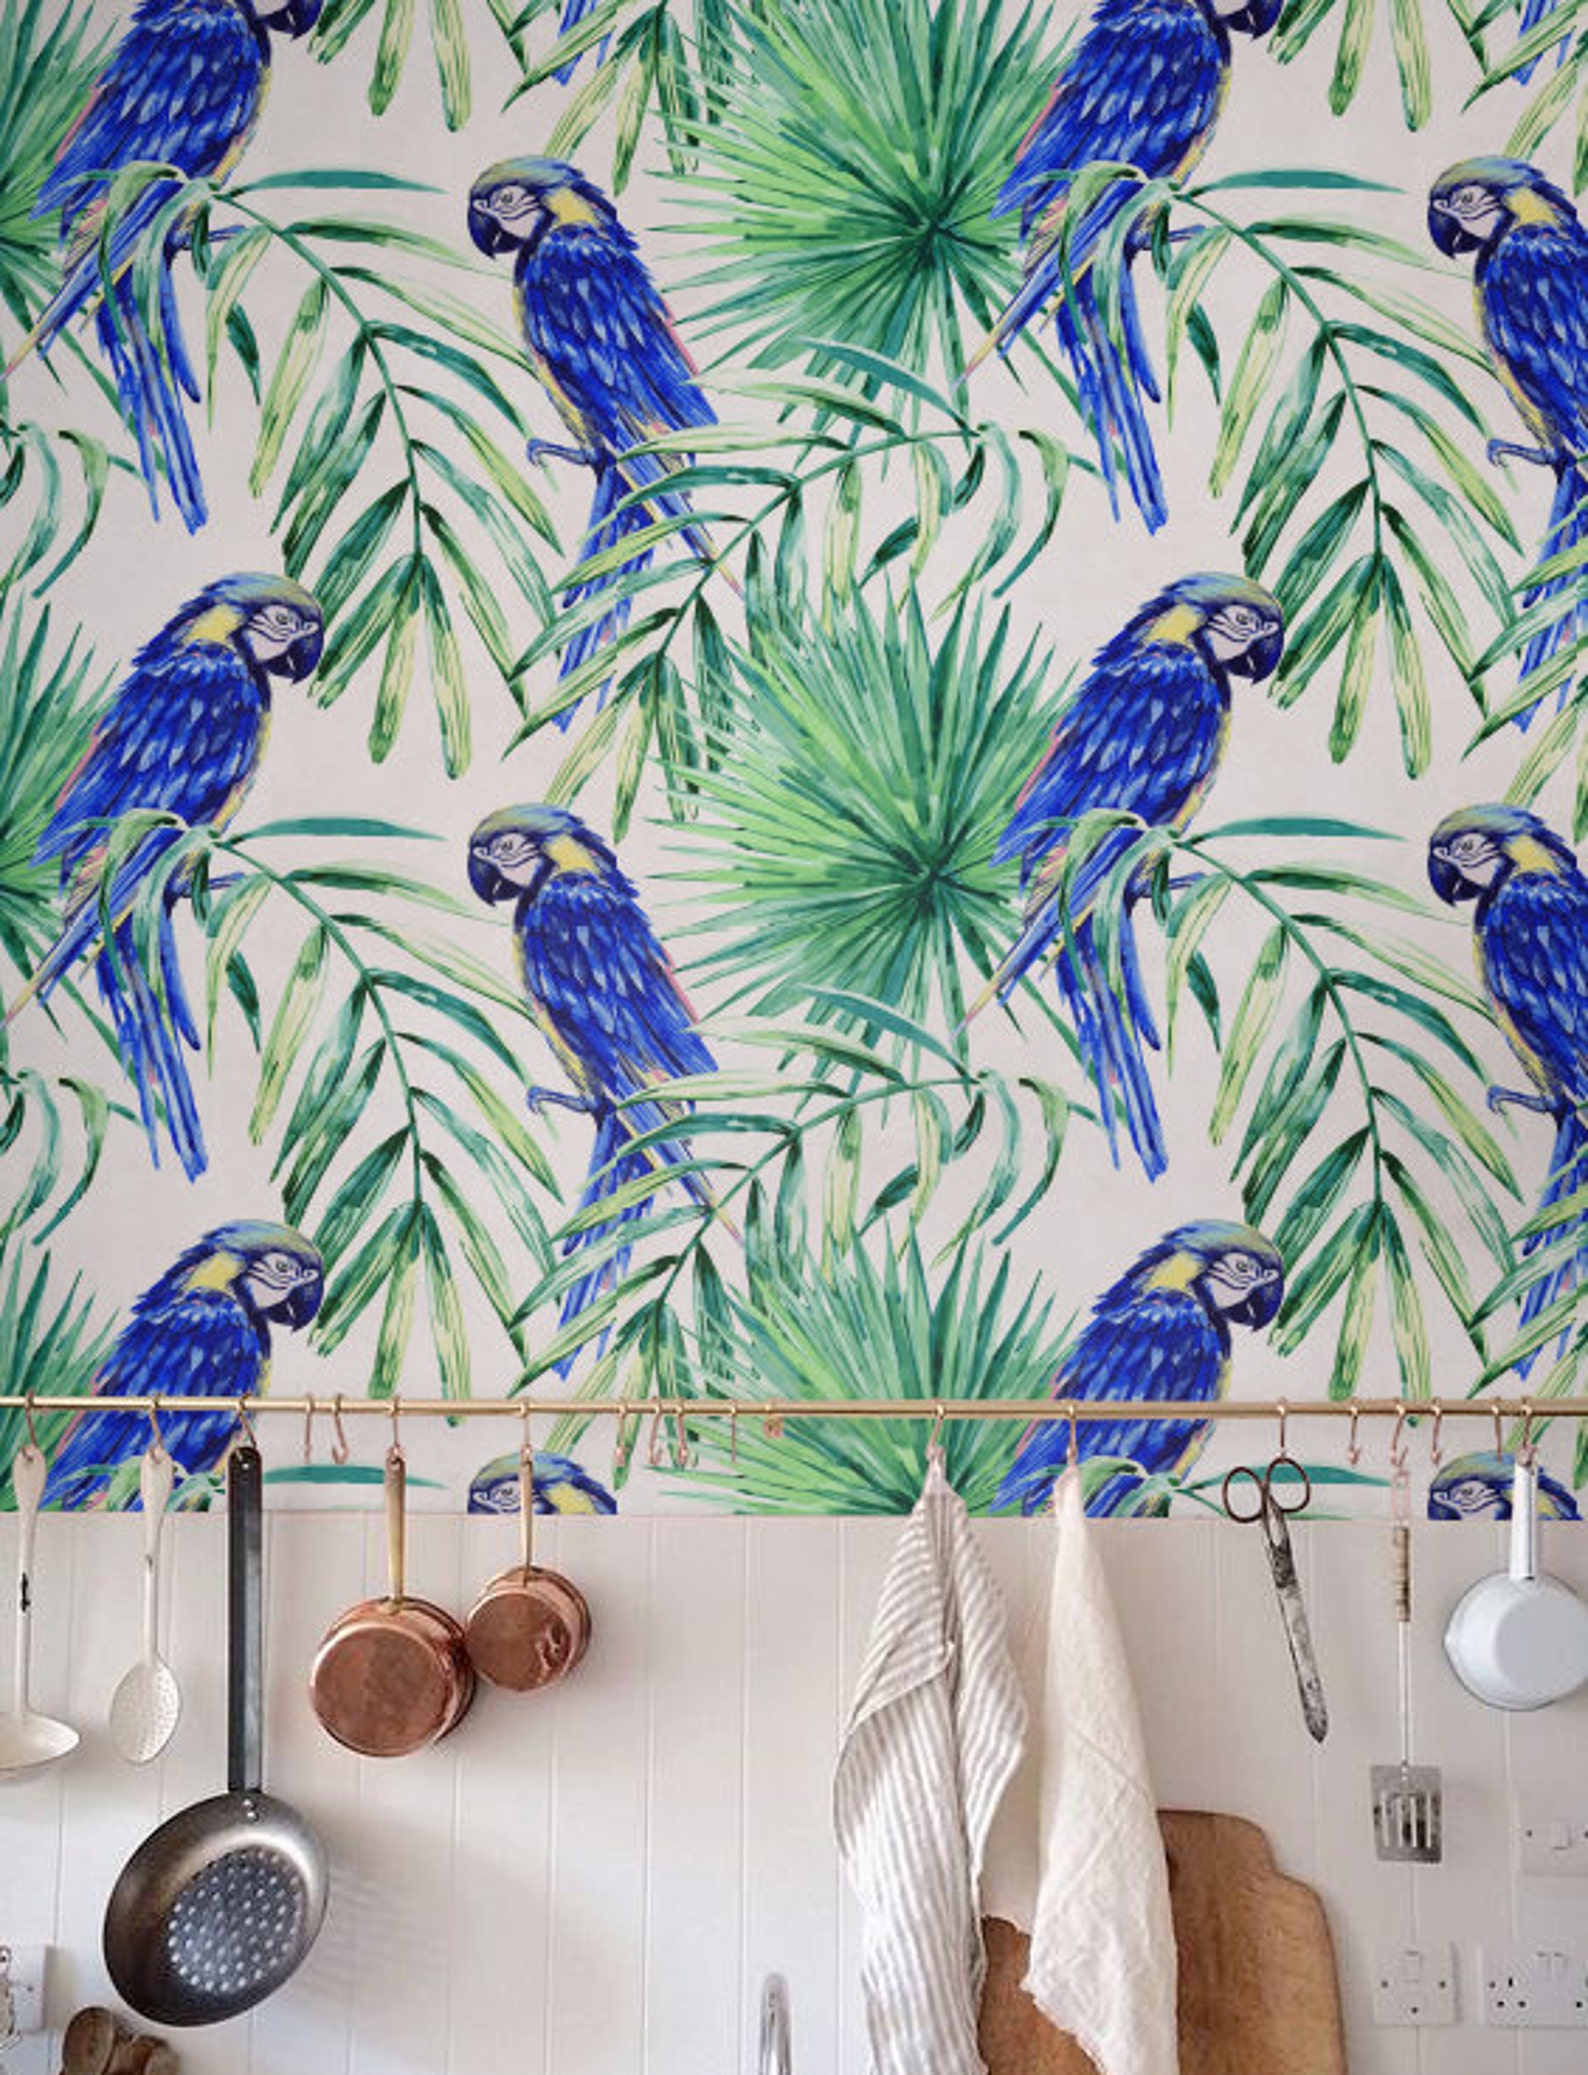 Removable Wallpaper Palm Leaf Wallpaper Self-adhesive Parrot - Etsy